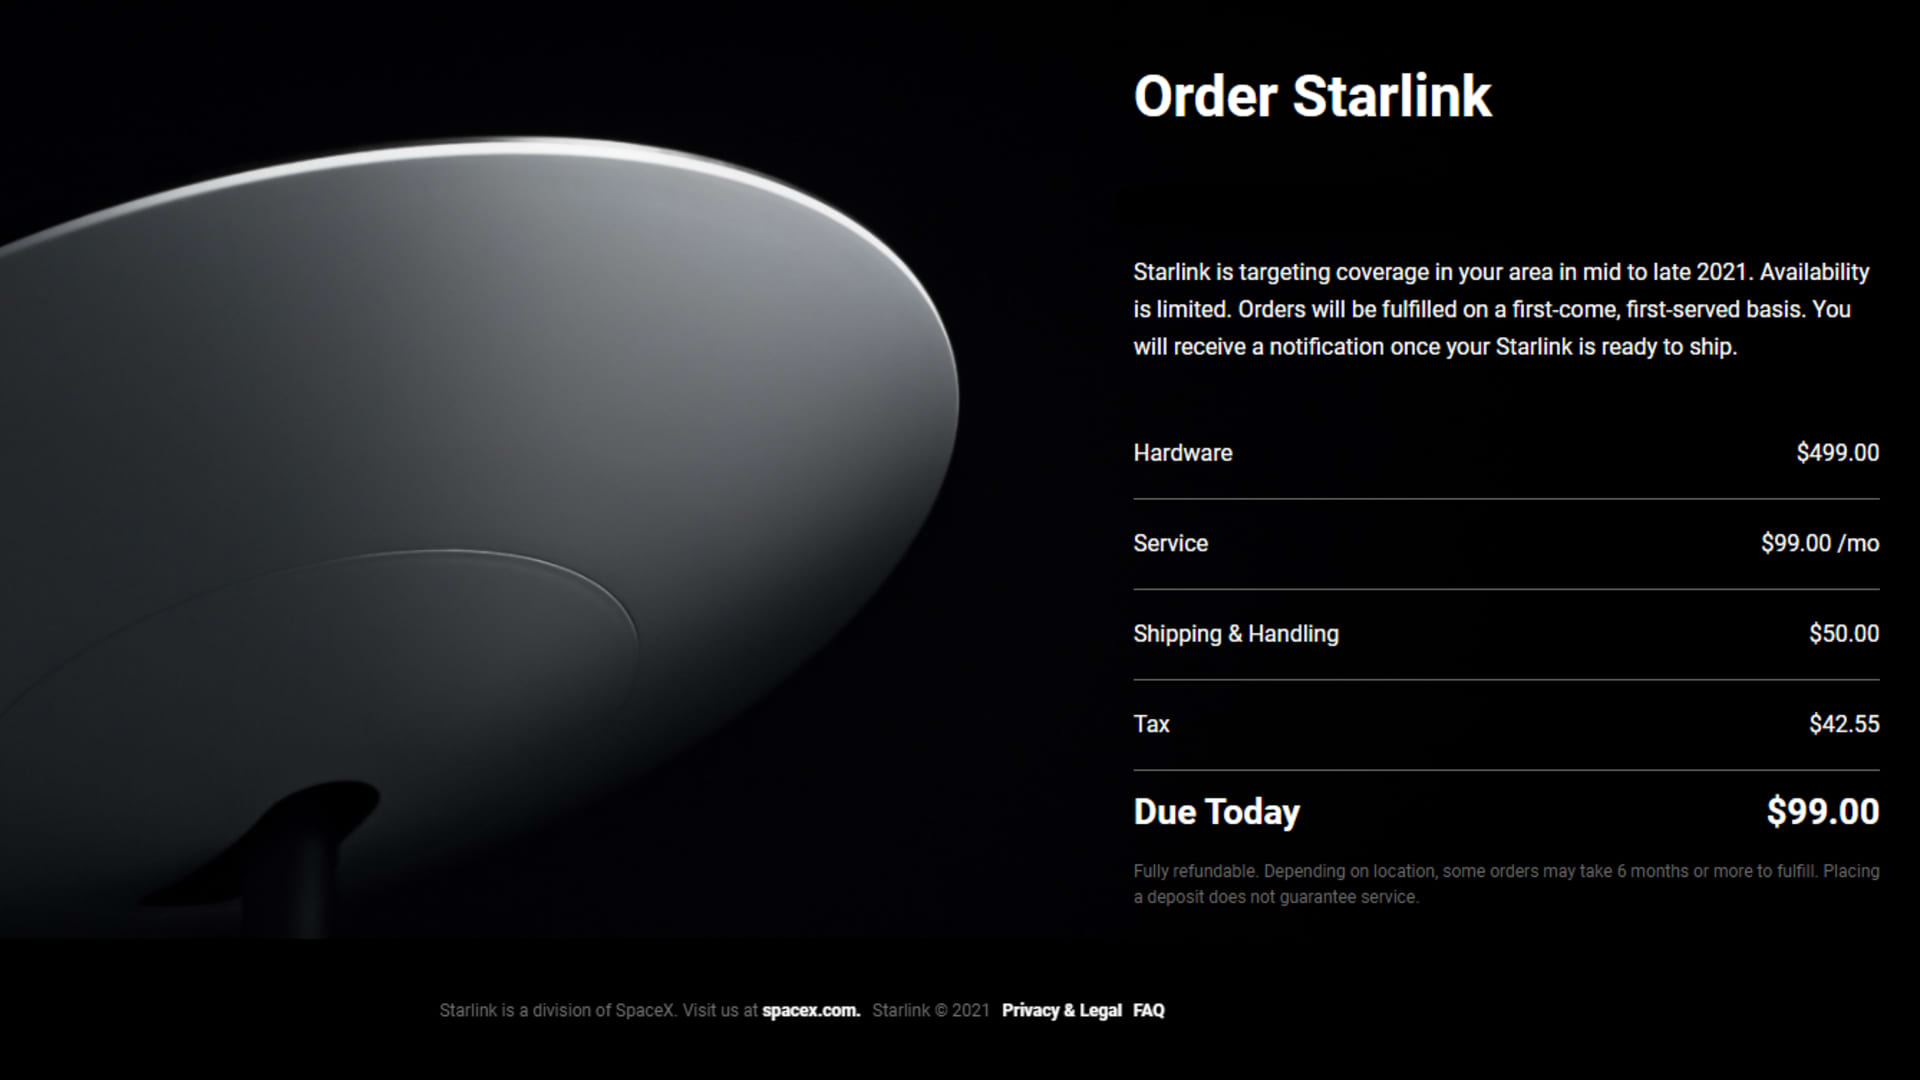 A screenshot of the preorder page of Starlink.com on Feb. 9, 2021.